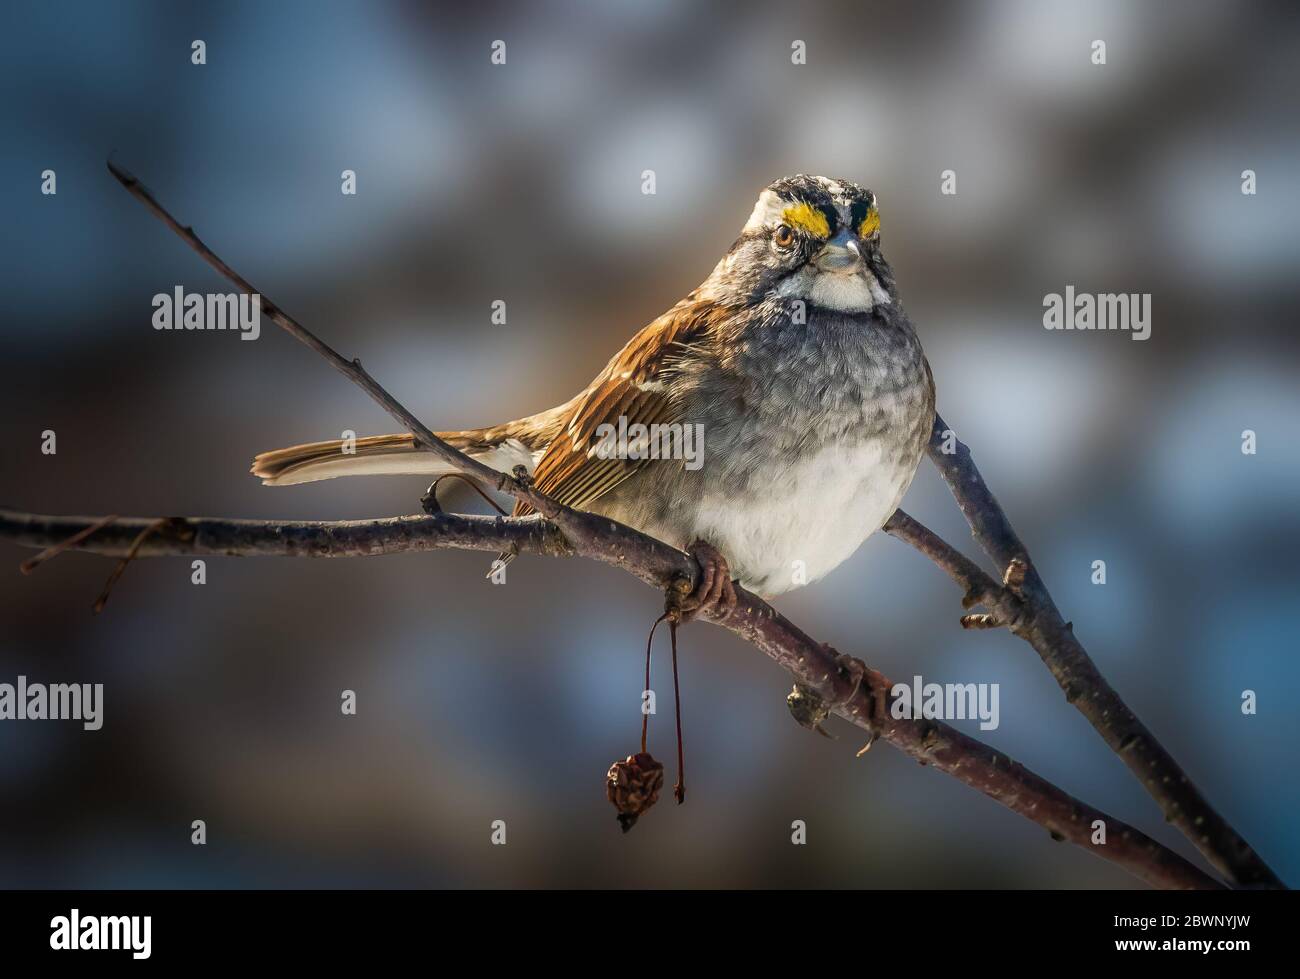 A Golden Crowned Sparrow glowers at the photographer from its perch Stock Photo